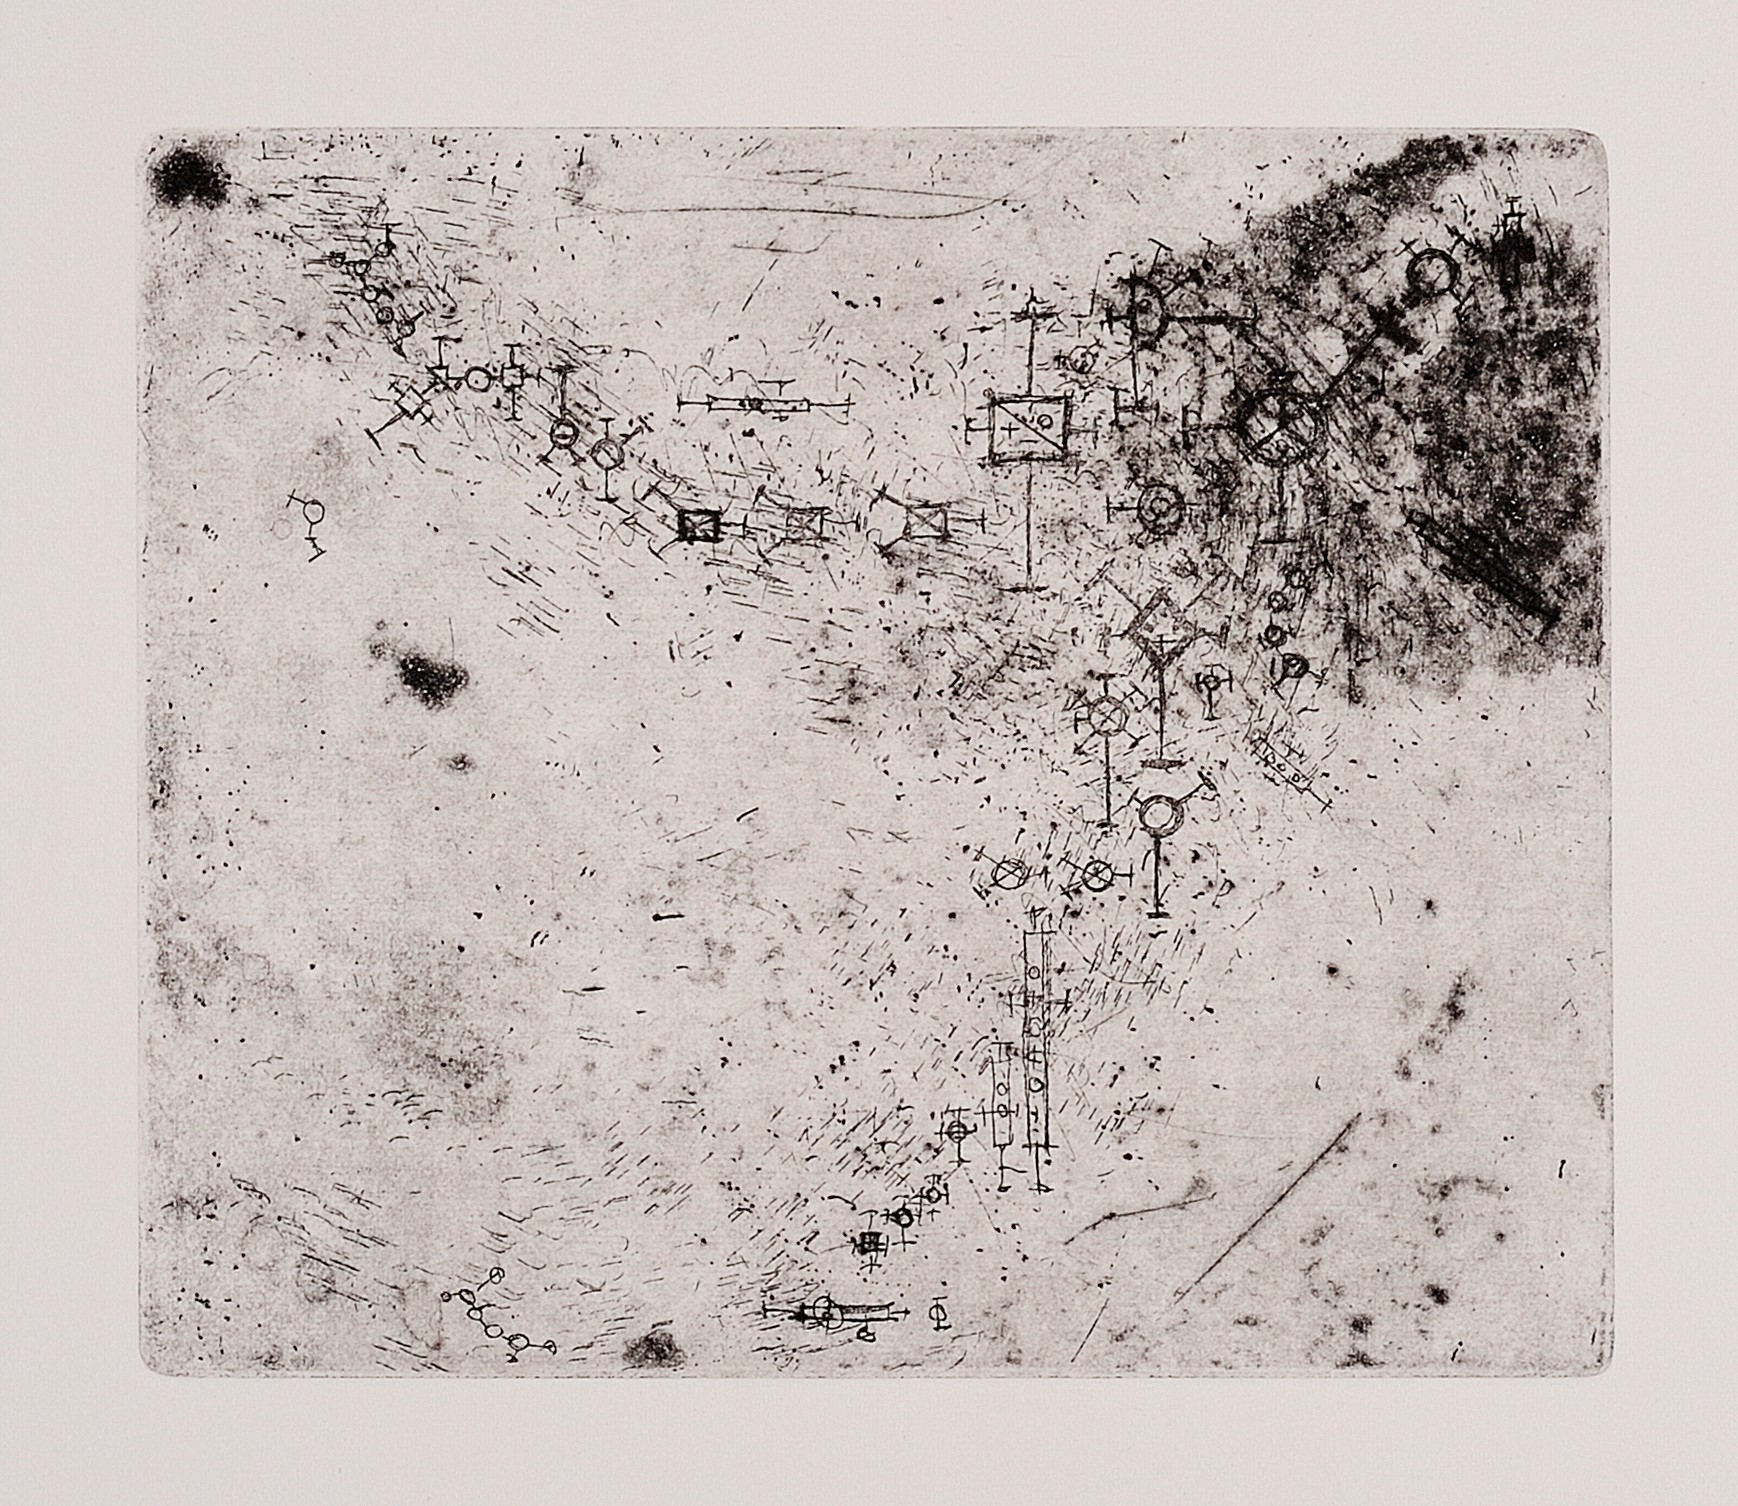 Edwin Tanner, <em>(Untitled)</em>, c. 1960, etching on paper, edition unspecified, 13.0 x 15.0 cm. Courtesy Charles Nodrum Gallery.